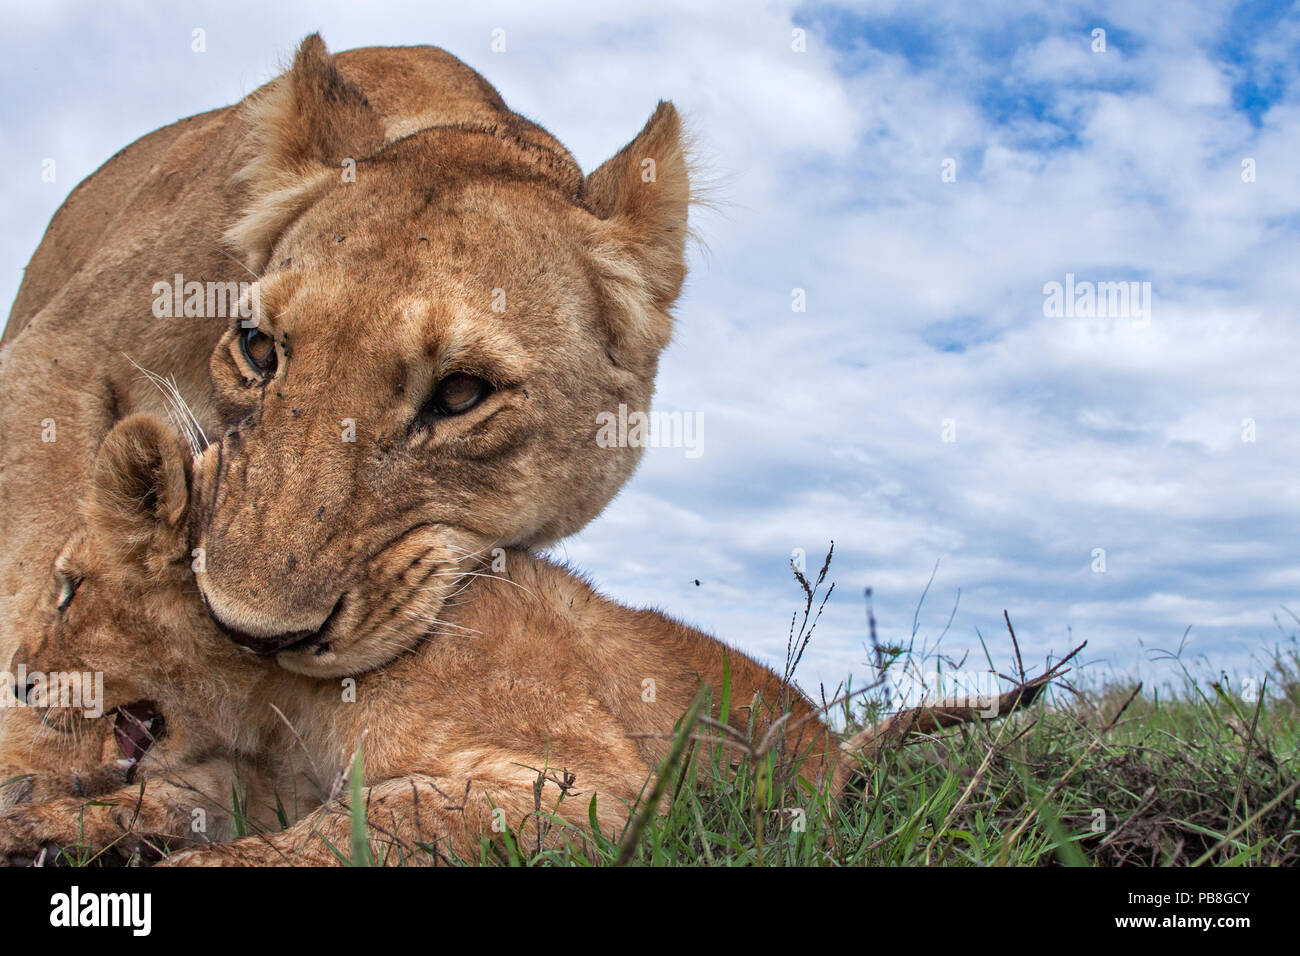 Lioness (Panthera leo) trying to pick up a cub aged about 2 months in her mouth, Maasai Mara National Reserve, Kenya. Taken with remote wide angle camera. Stock Photo